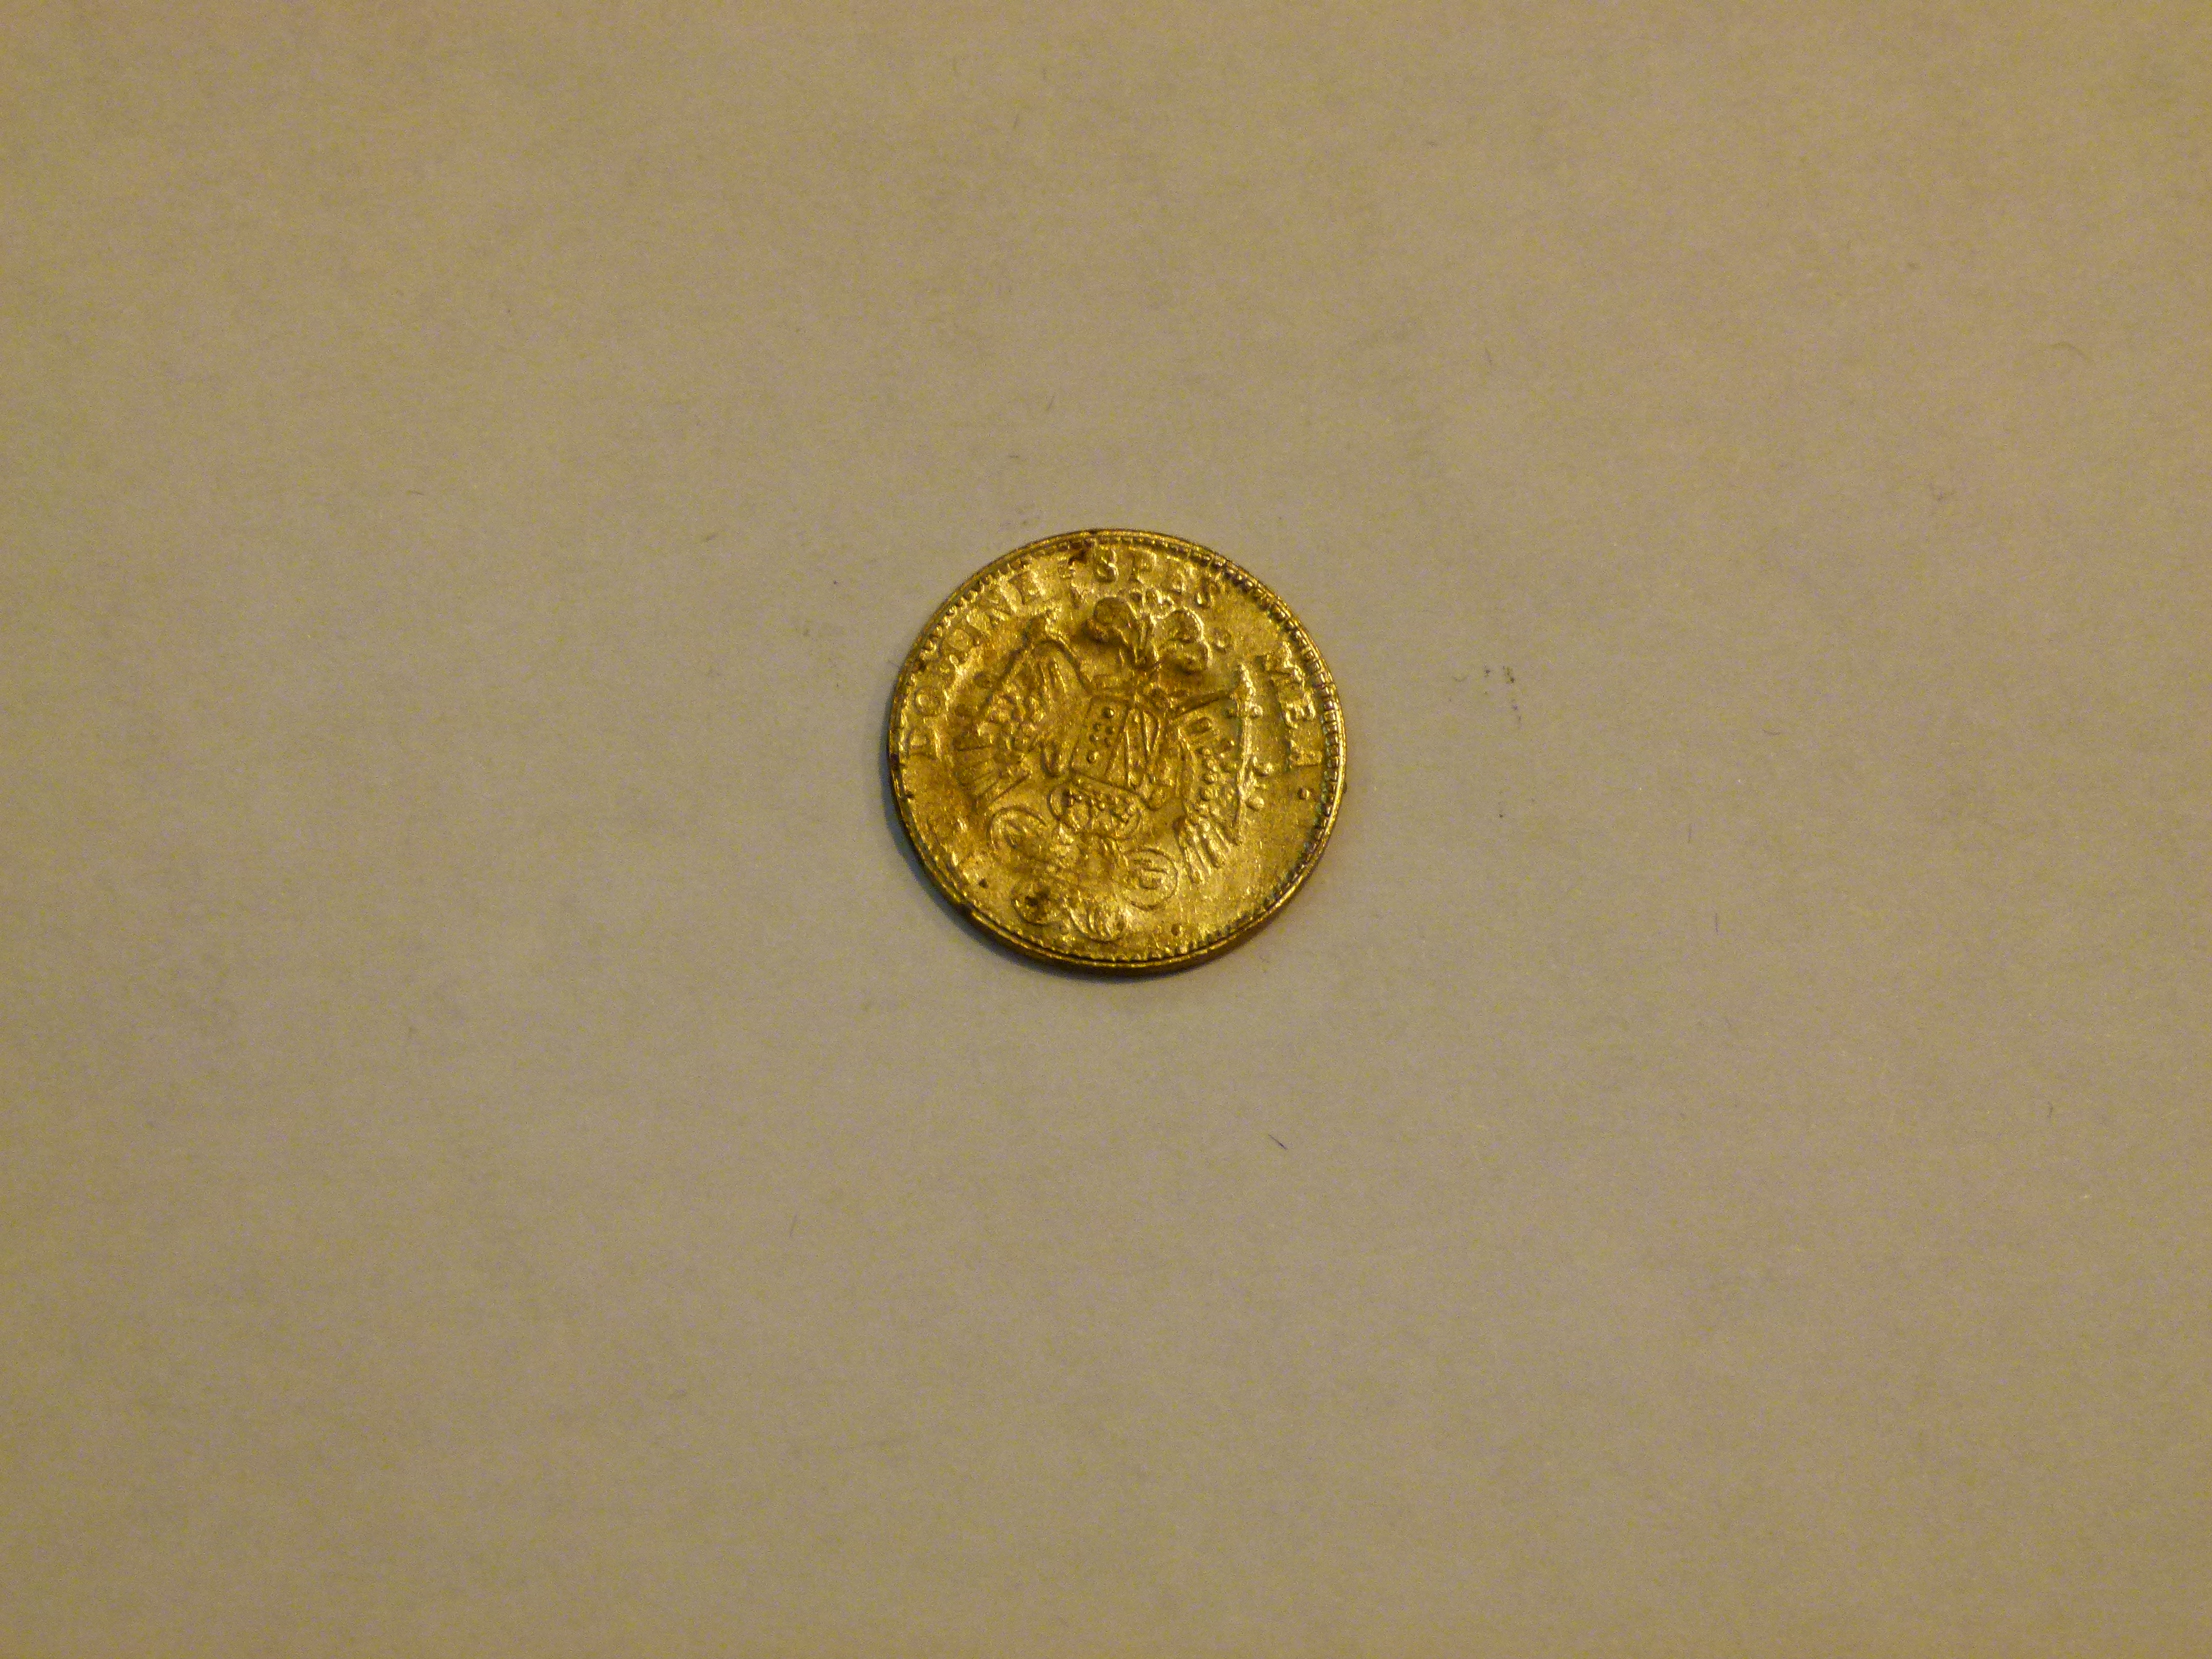 Anglesey penny in very good condition, r - Image 3 of 3